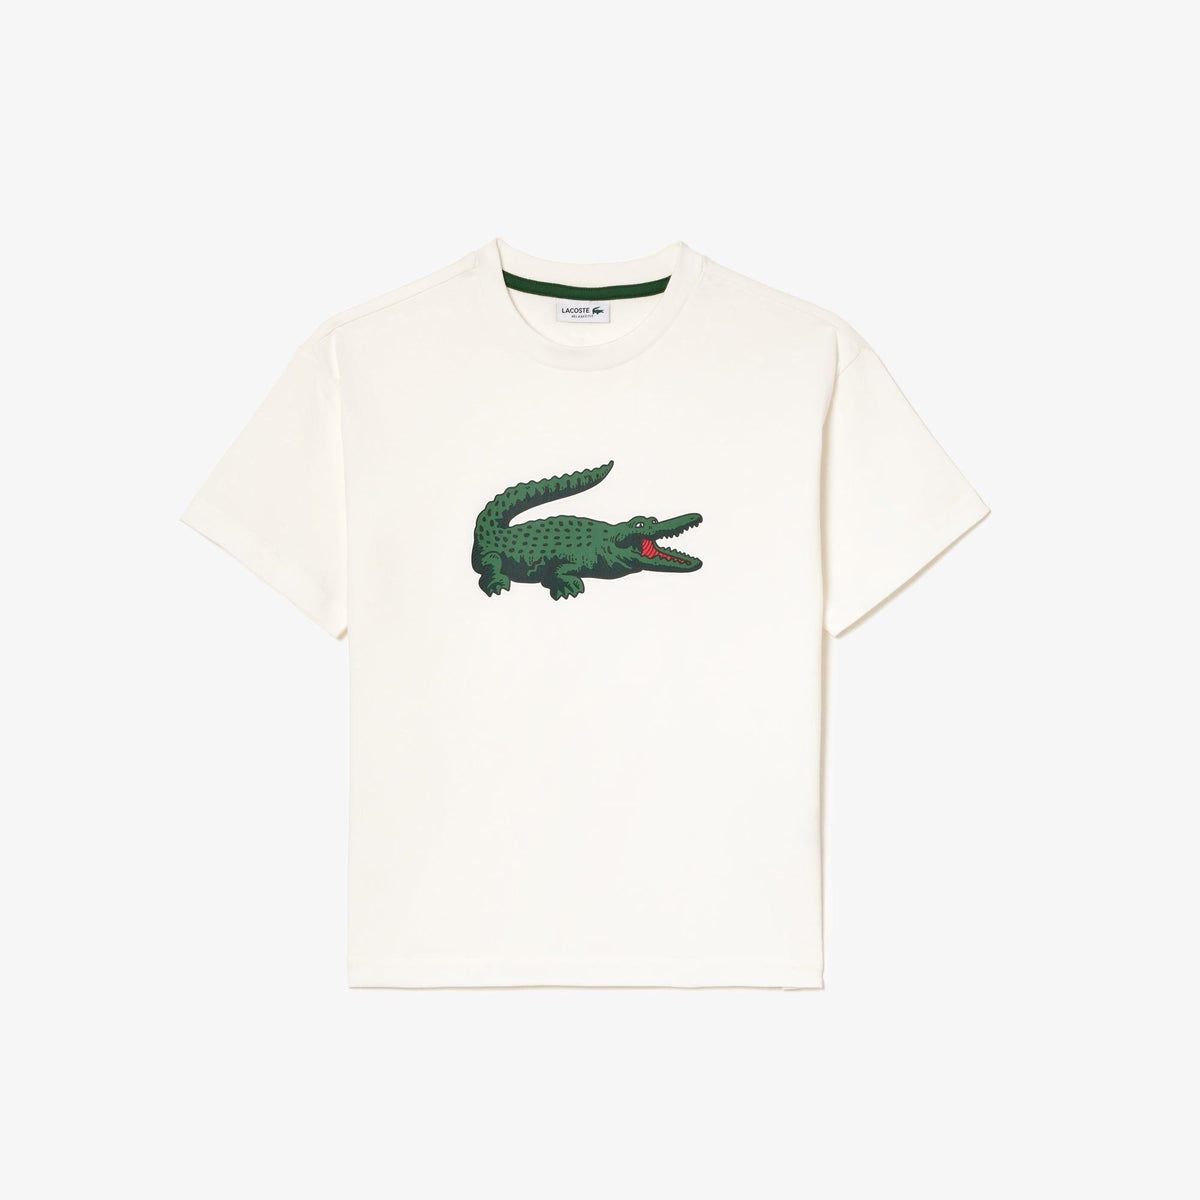 Lacoste Robert George T-Shirt InfantAlive & Dirty 